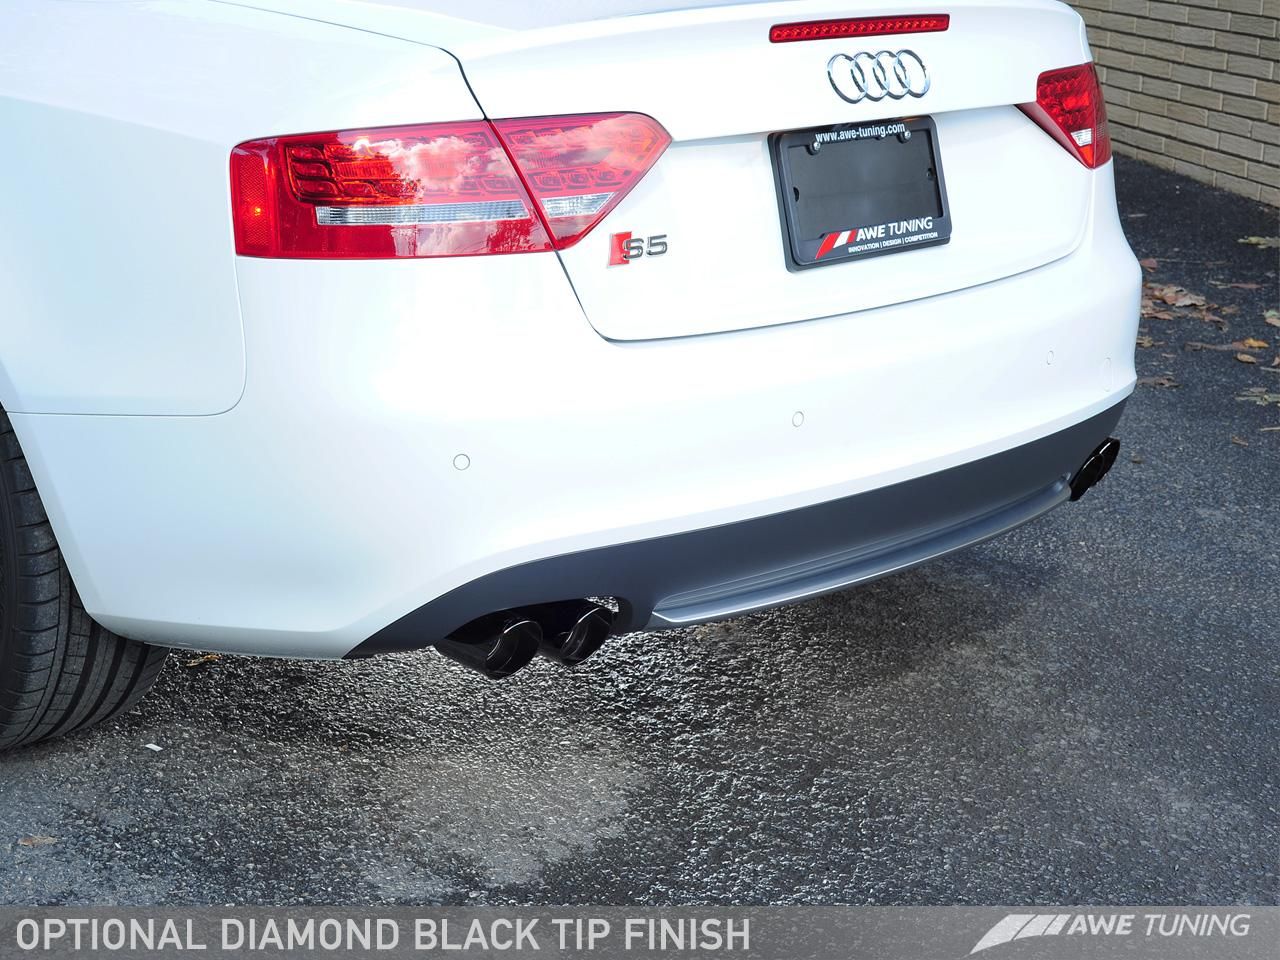 2011 Audi S5 Convertible by Awe Tuning